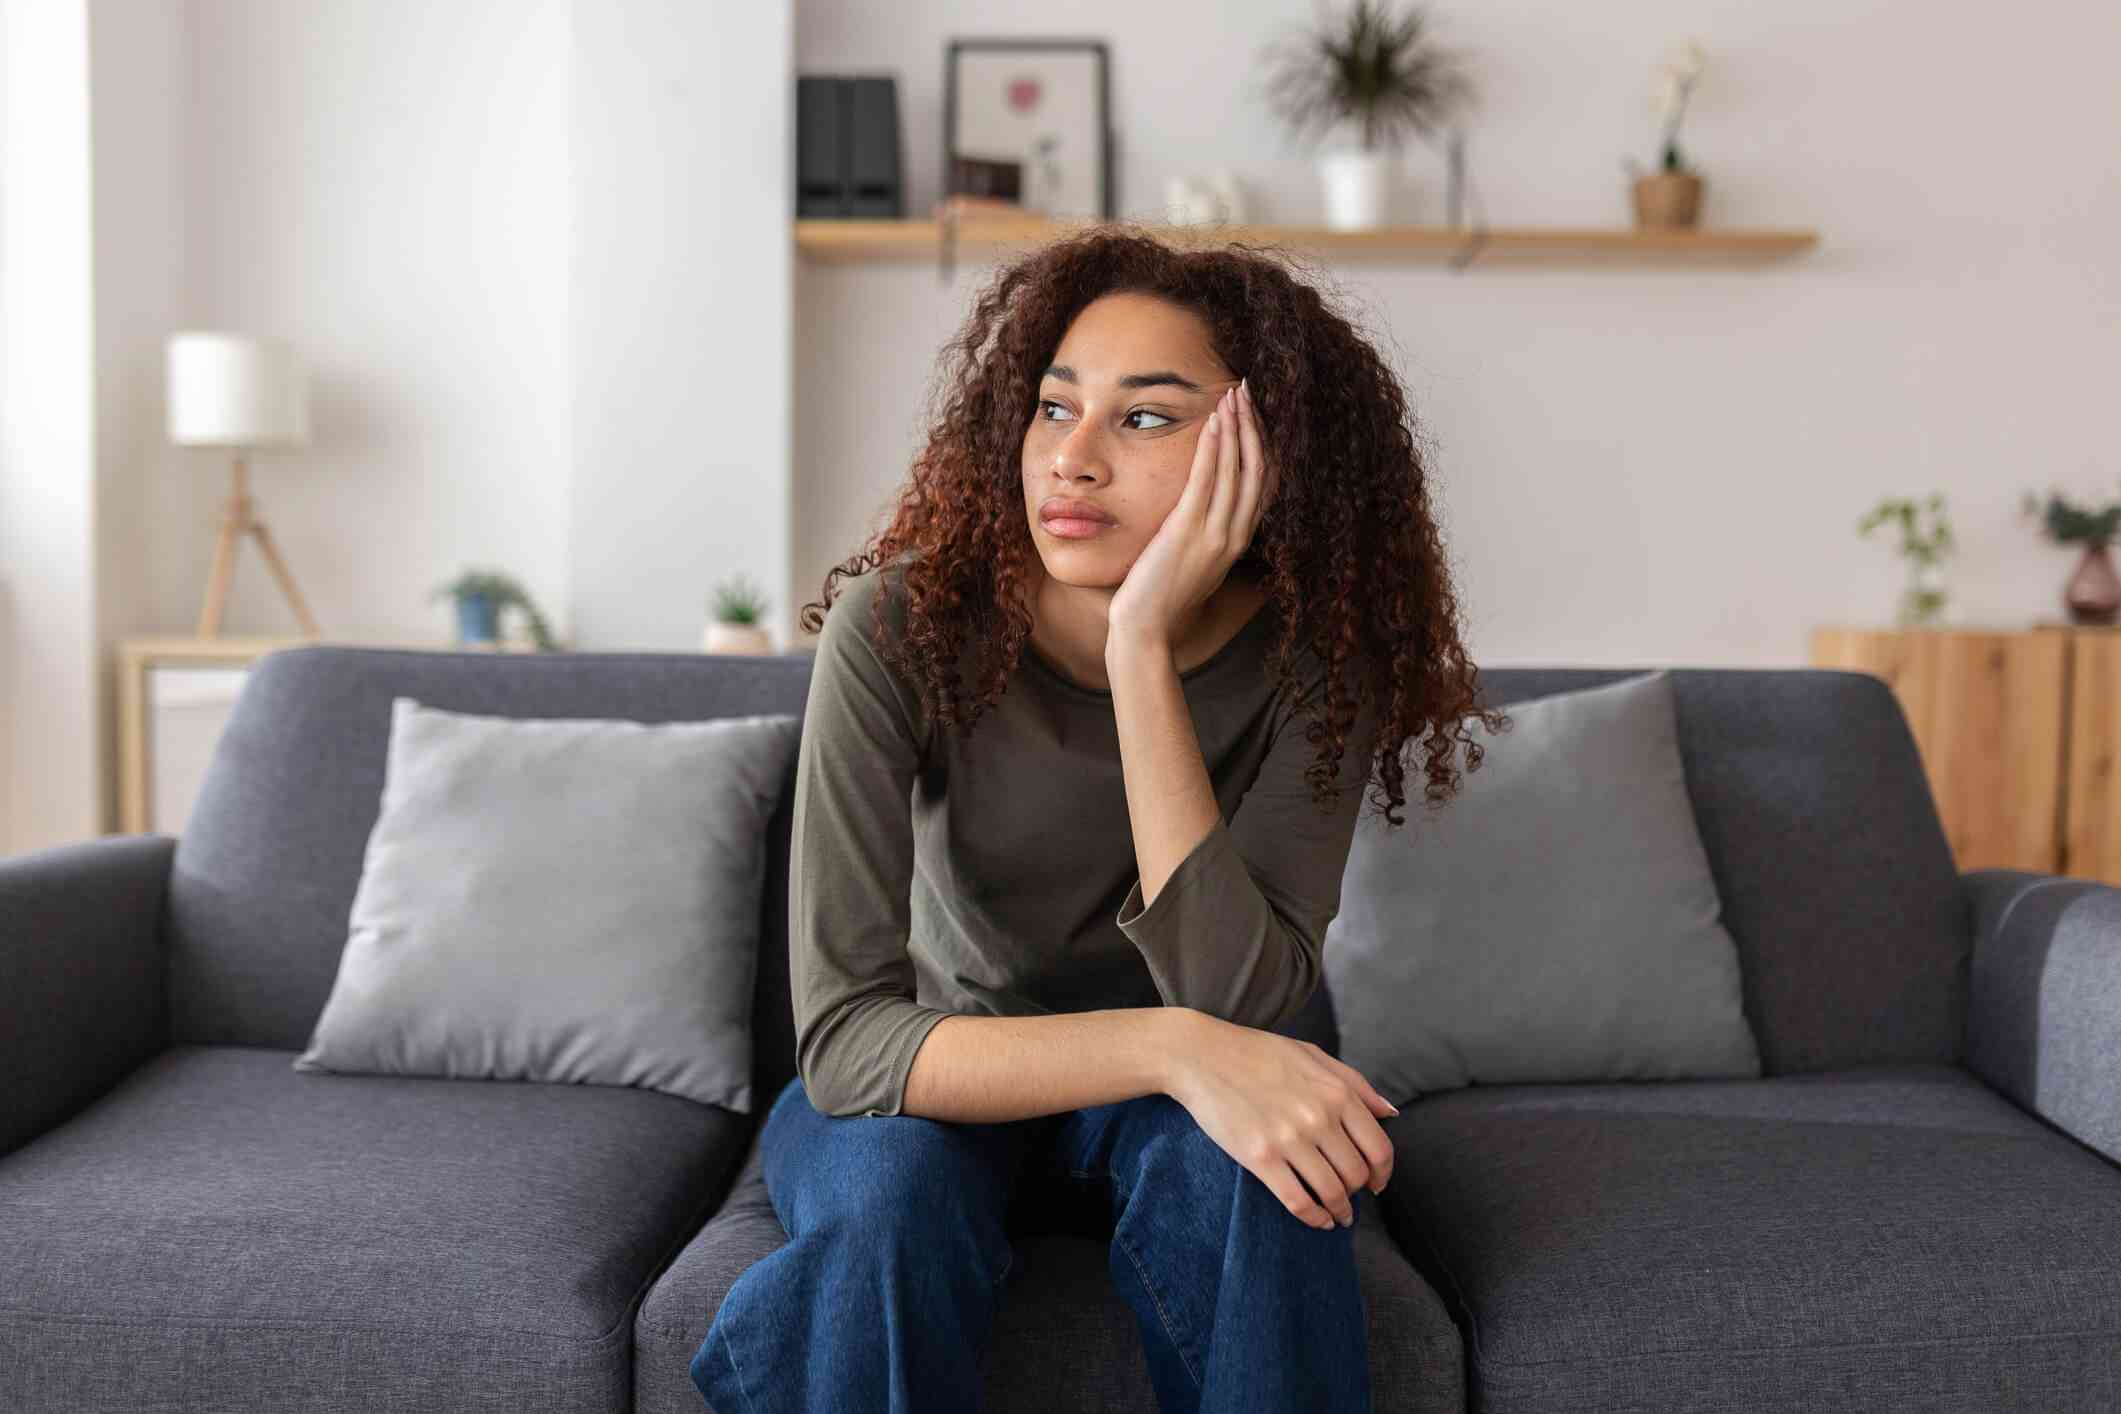 A woman in a grey shirt sits sadly on her couch with her head in her hand while gazing off sadly.